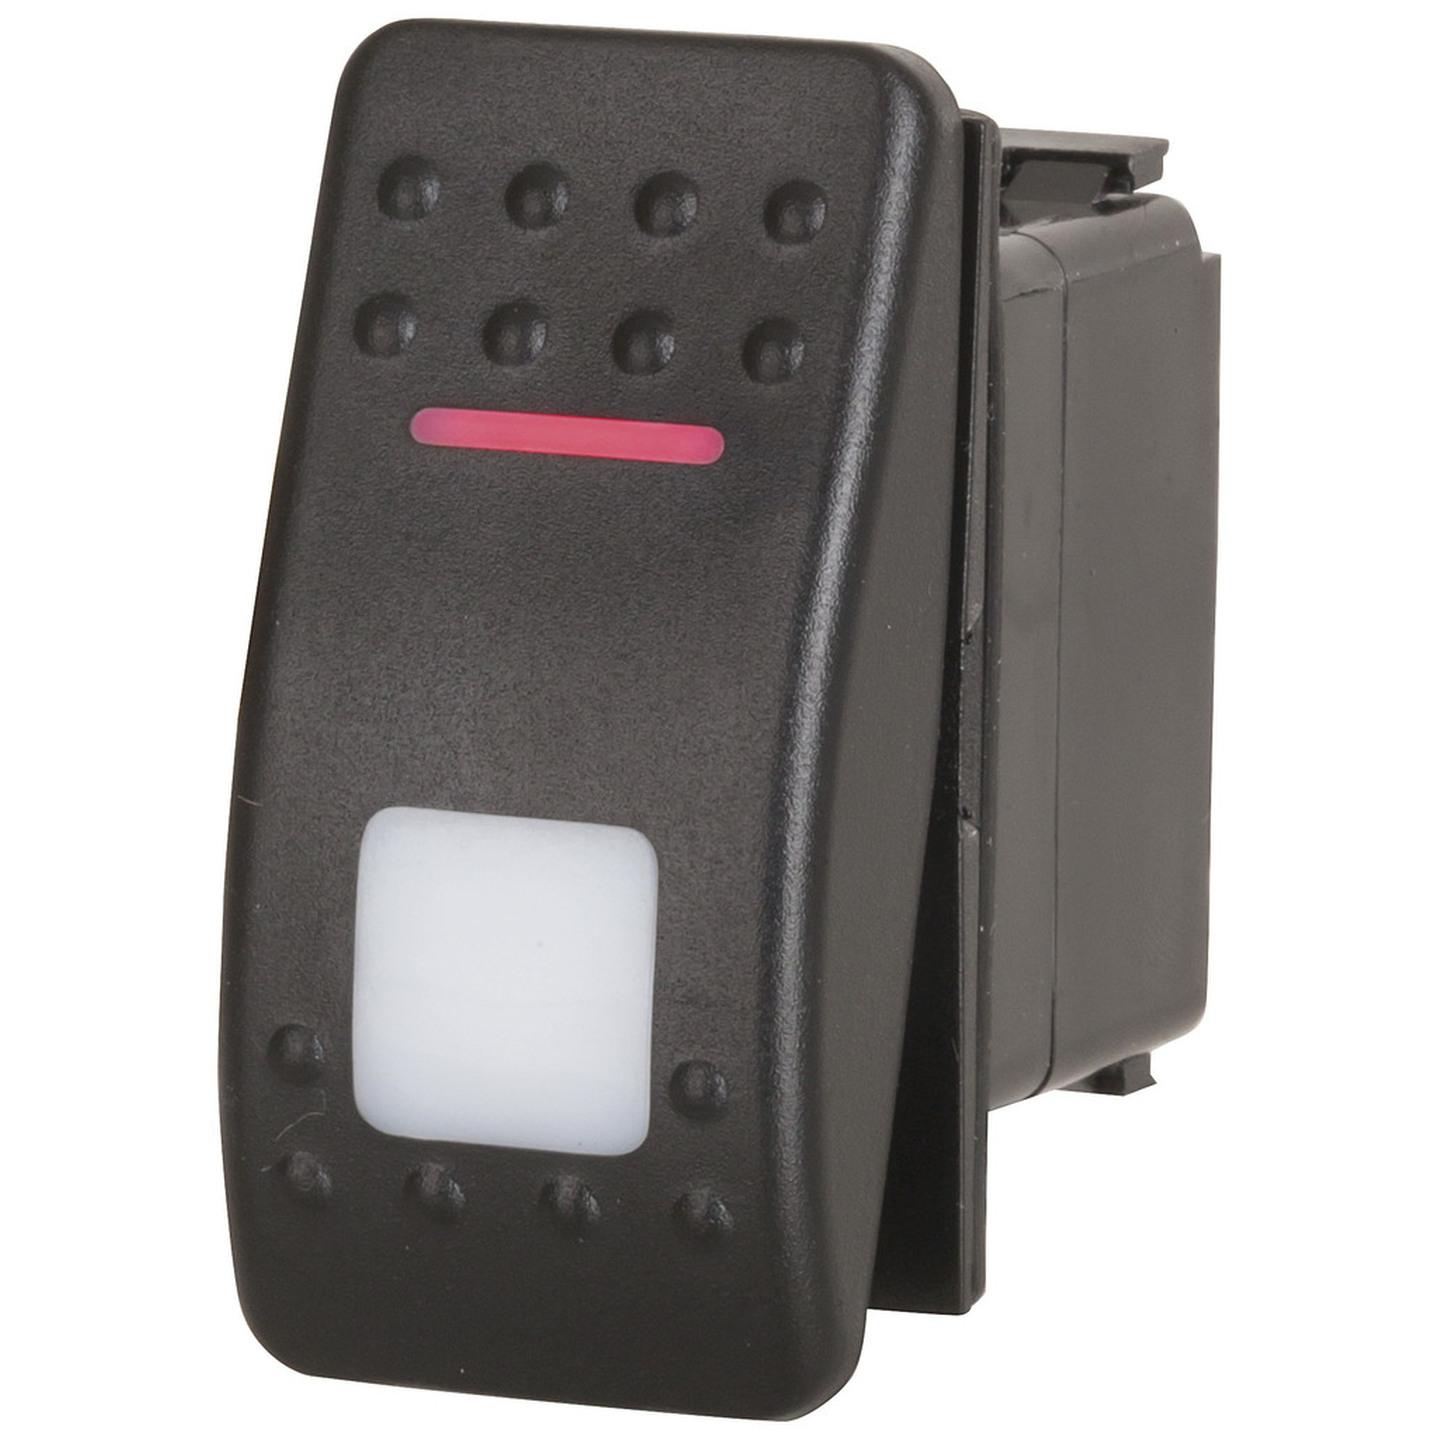 SPDT Dual Illuminated Rocker Switch with Labels and Interchangeable Covers - Red